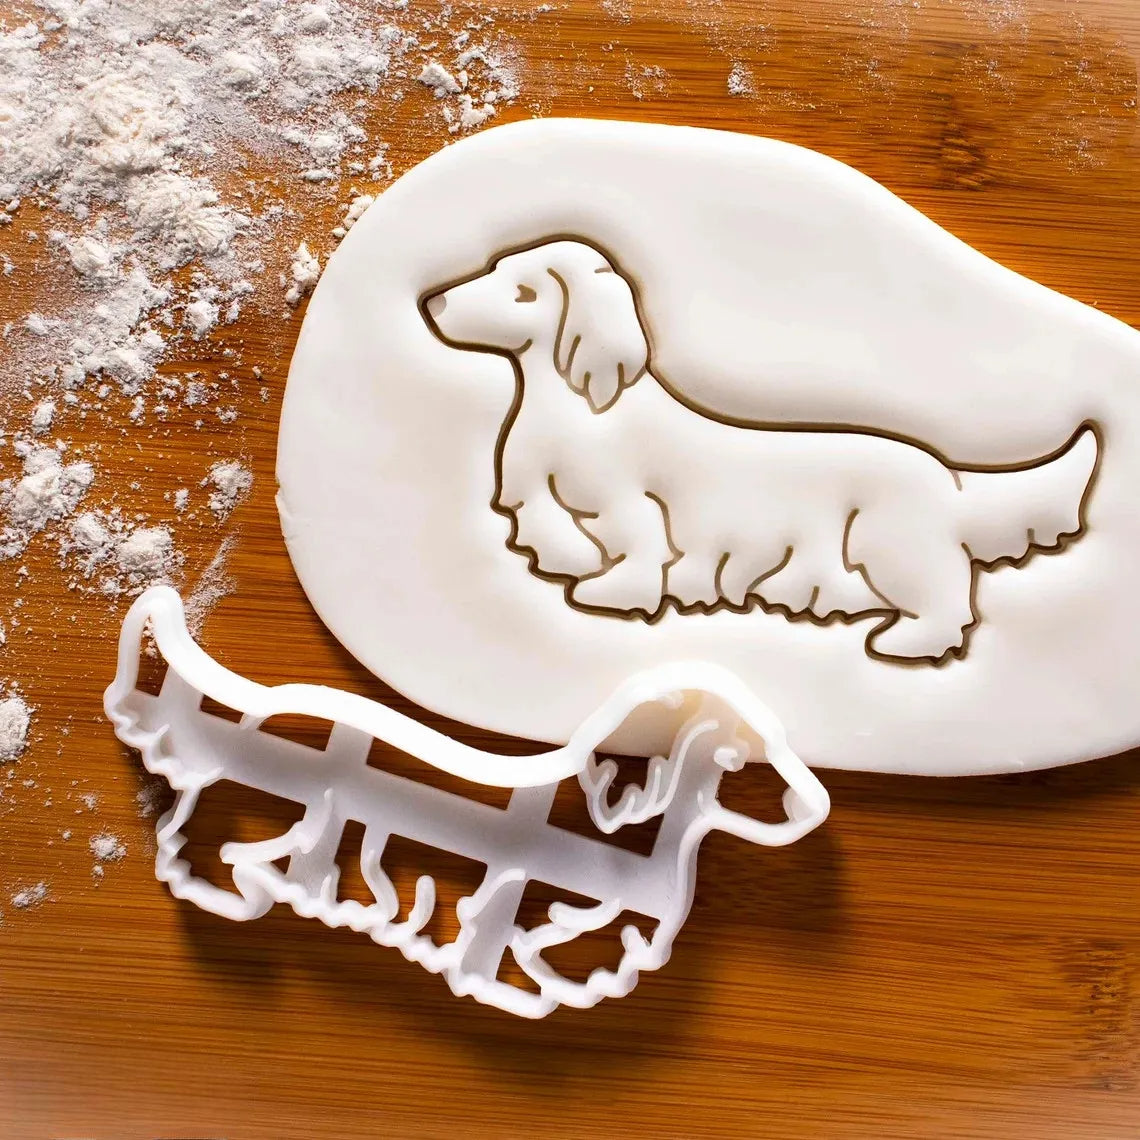 Long Haired Dachshund Cookie Cutters | The Best Dachshund Gifts